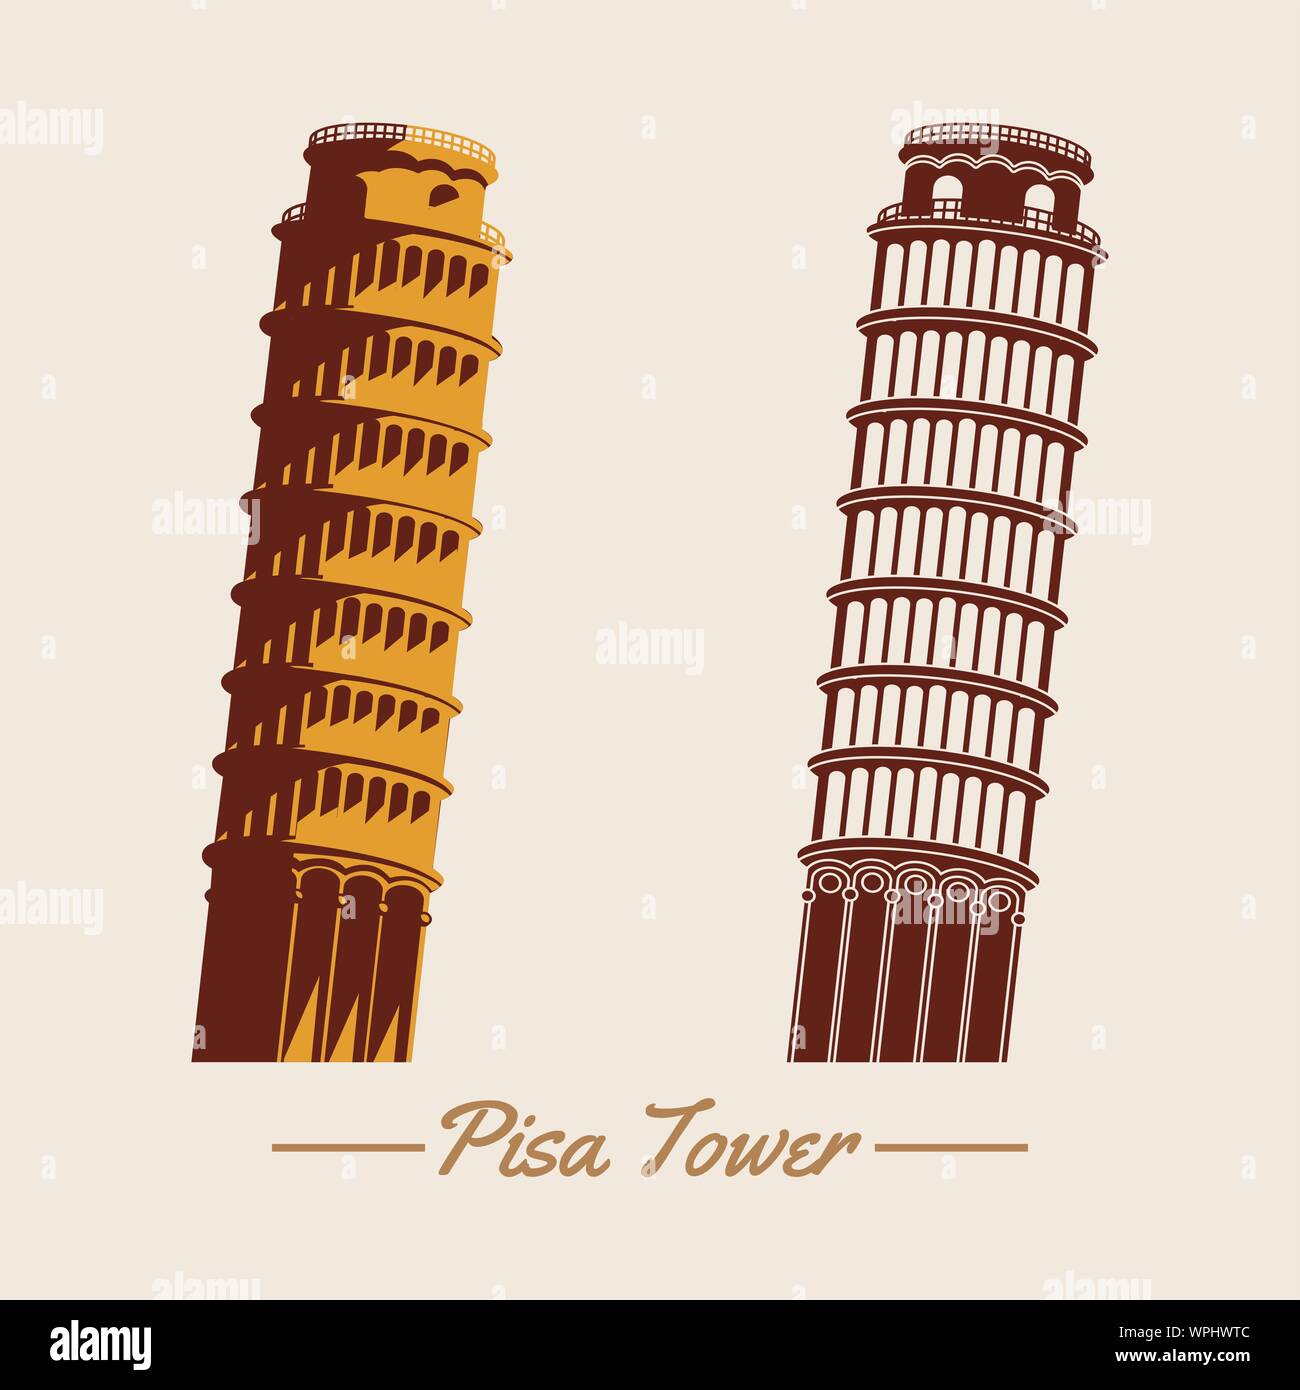 Pisa tower within two design,silhouette and cartoon version,famous landmark and travel of Italy,vector illustration,vintage color design Stock Vector